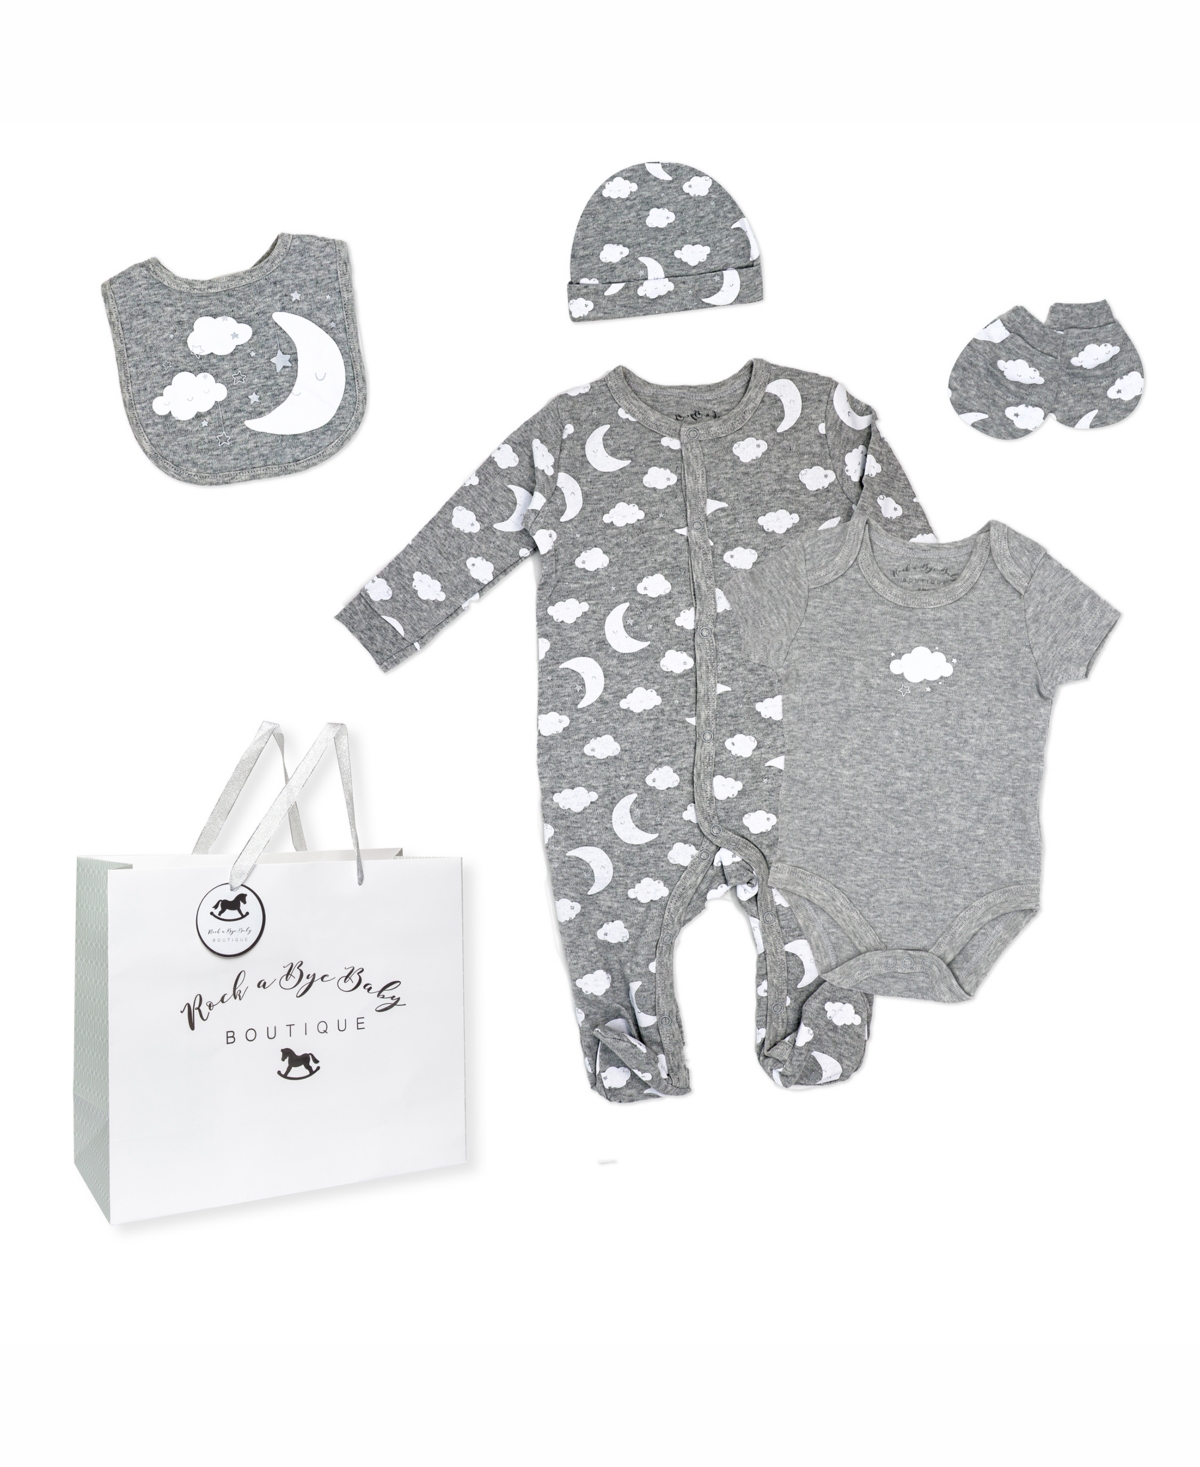 Rock-a-bye Baby Boutique Baby Boys Or Baby Girls Layette Gift Bag Set In Clouds